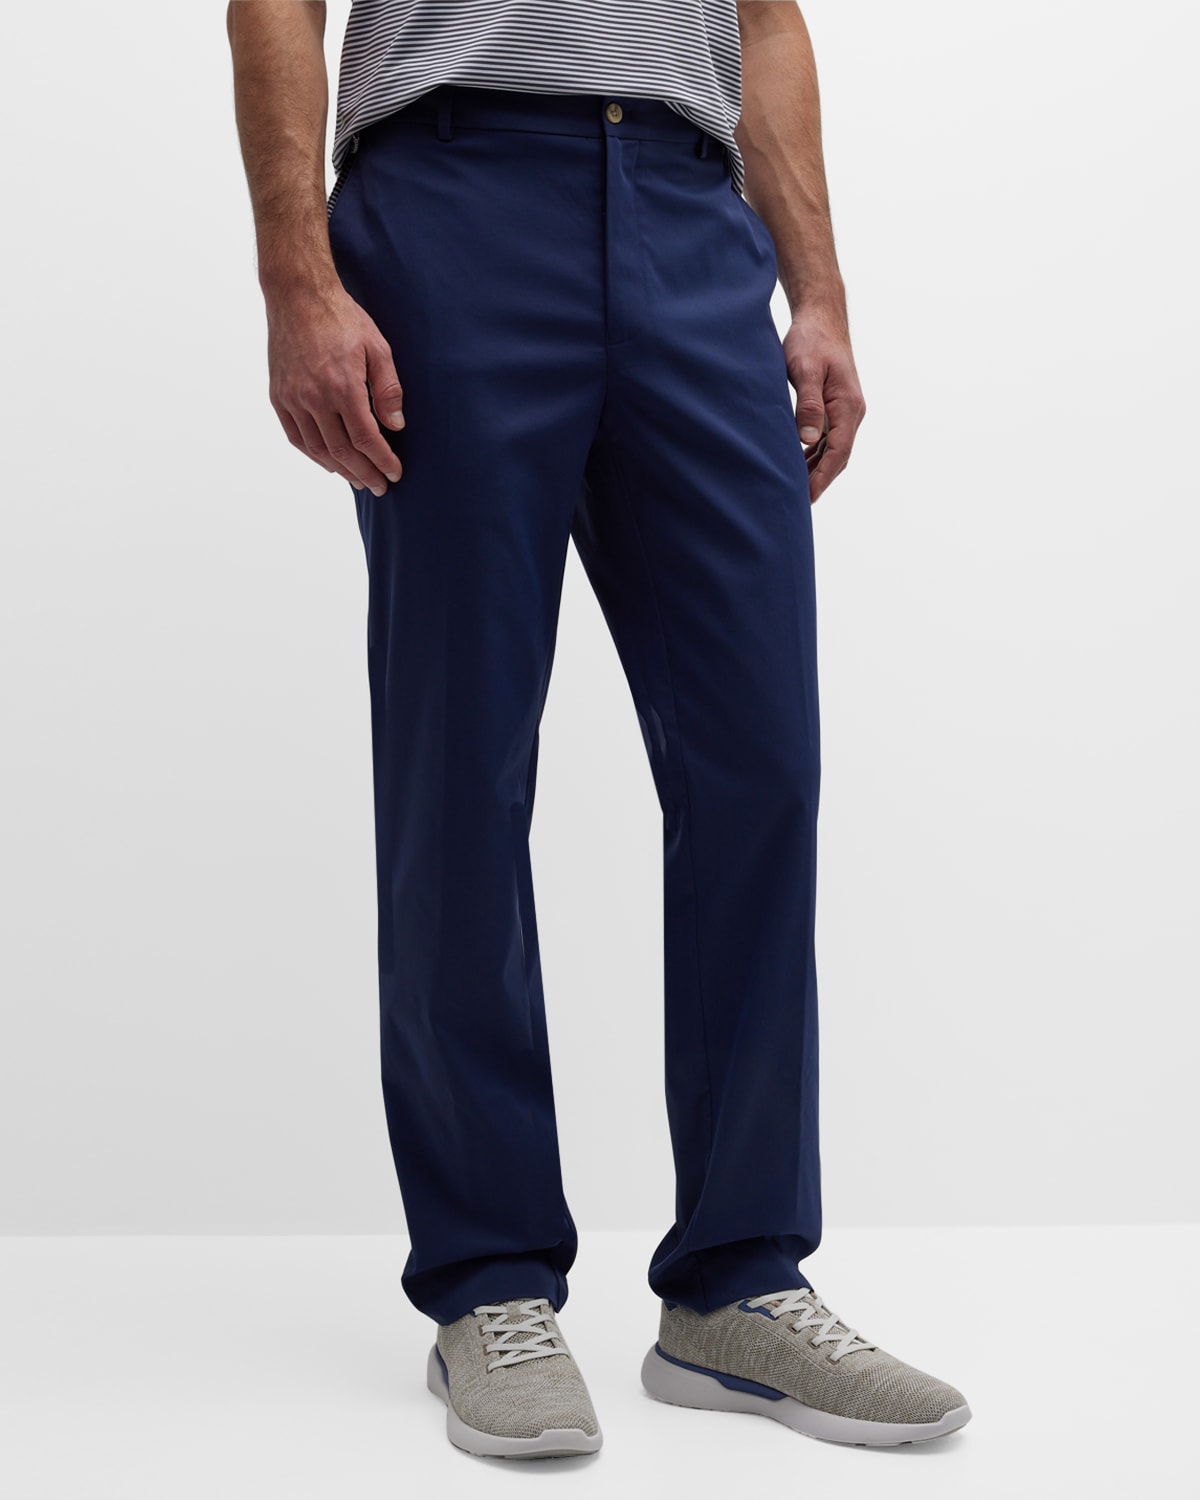 Men's Raleigh Performance Trousers